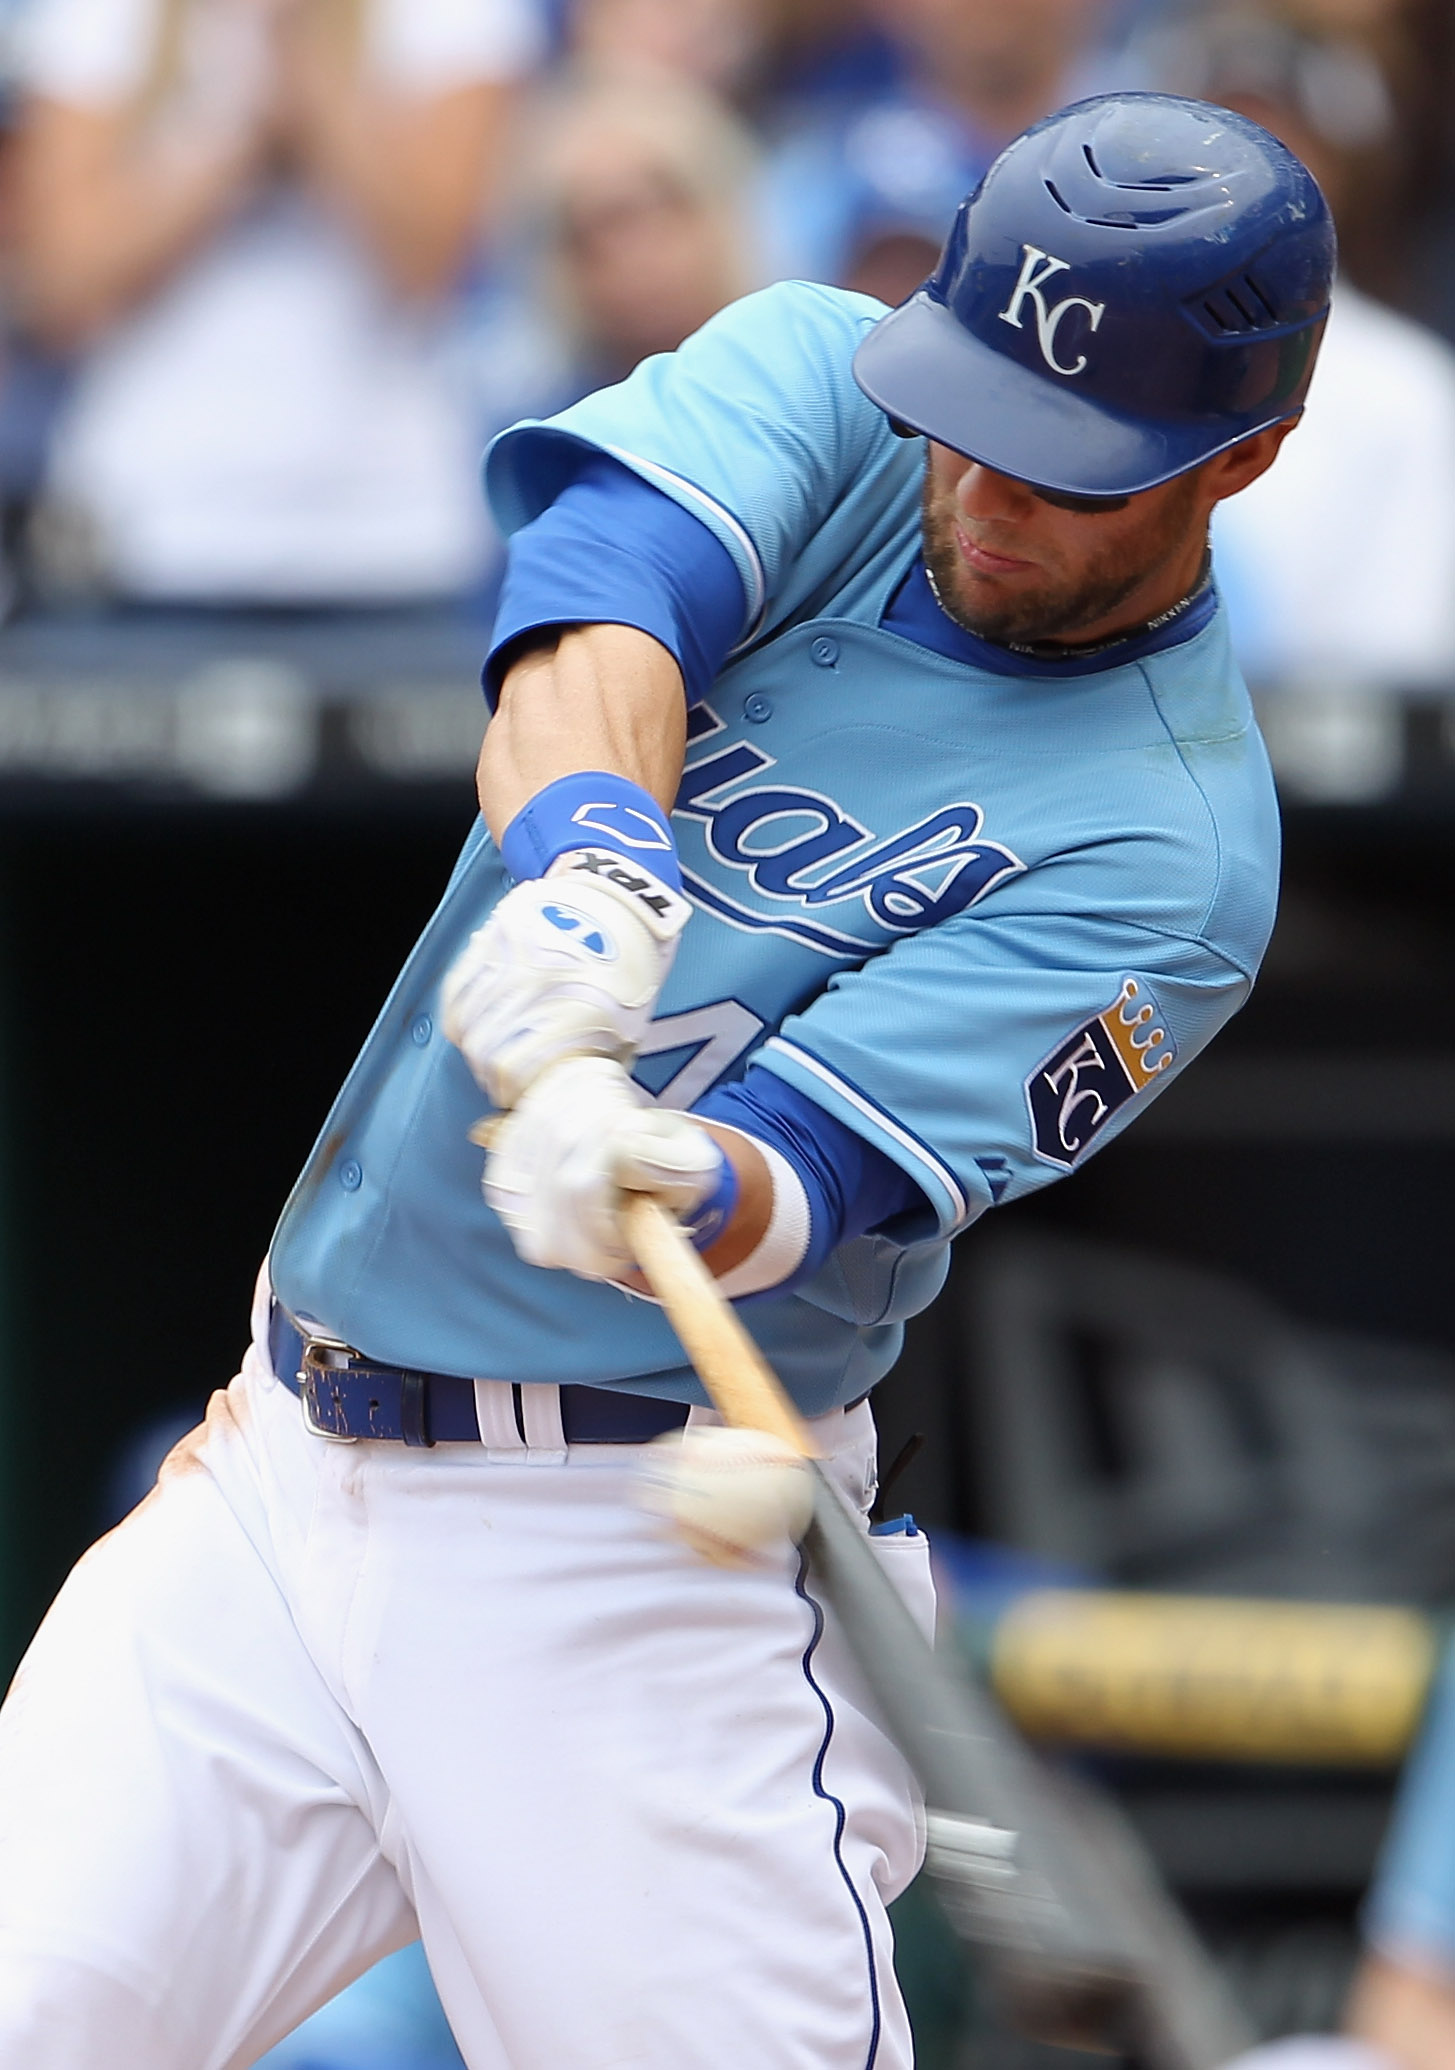 KANSAS CITY, MO - APRIL 17:  Alex Gordon #4 of the Kansas City Royals connects during the game against the Seattle Mariners on April 17, 2011 at Kauffman Stadium in Kansas City, Missouri.  (Photo by Jamie Squire/Getty Images)